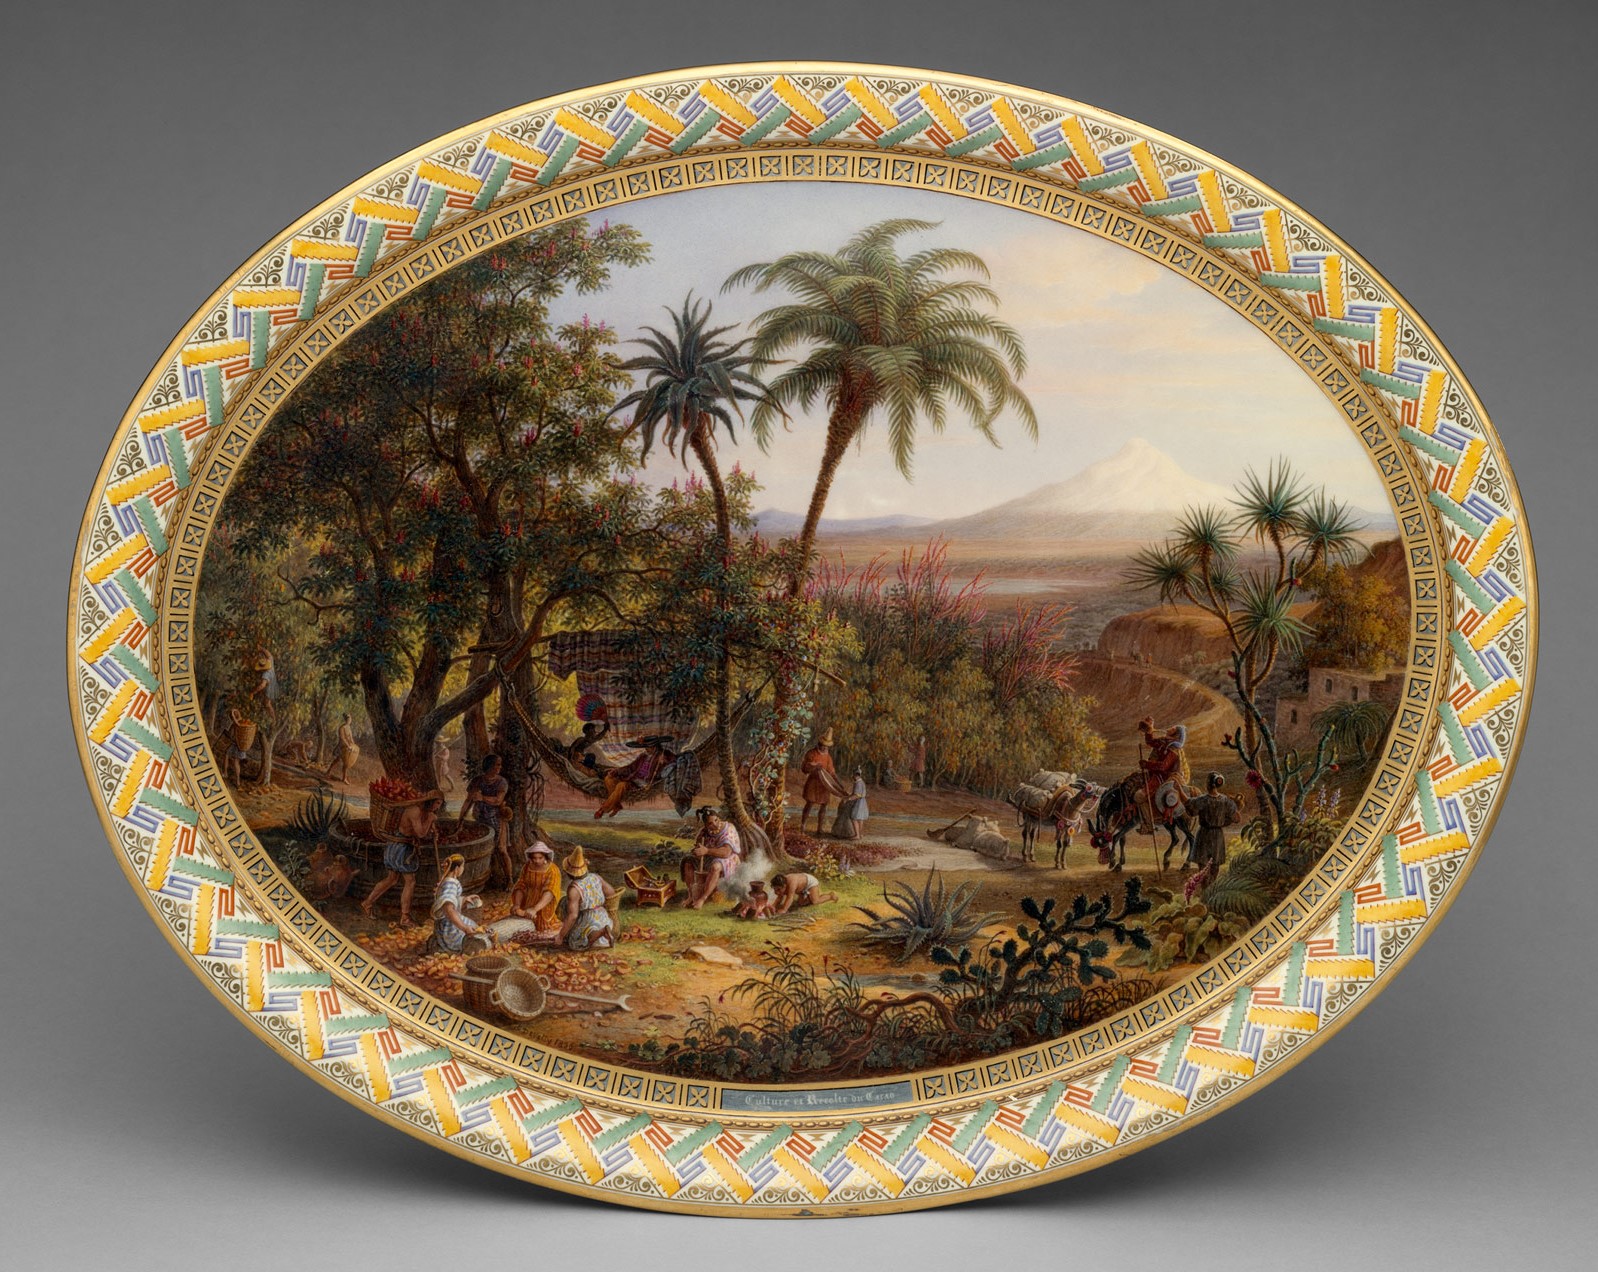 1836 Tray for Coffee service. Hard-paste porcelain. metmuseum